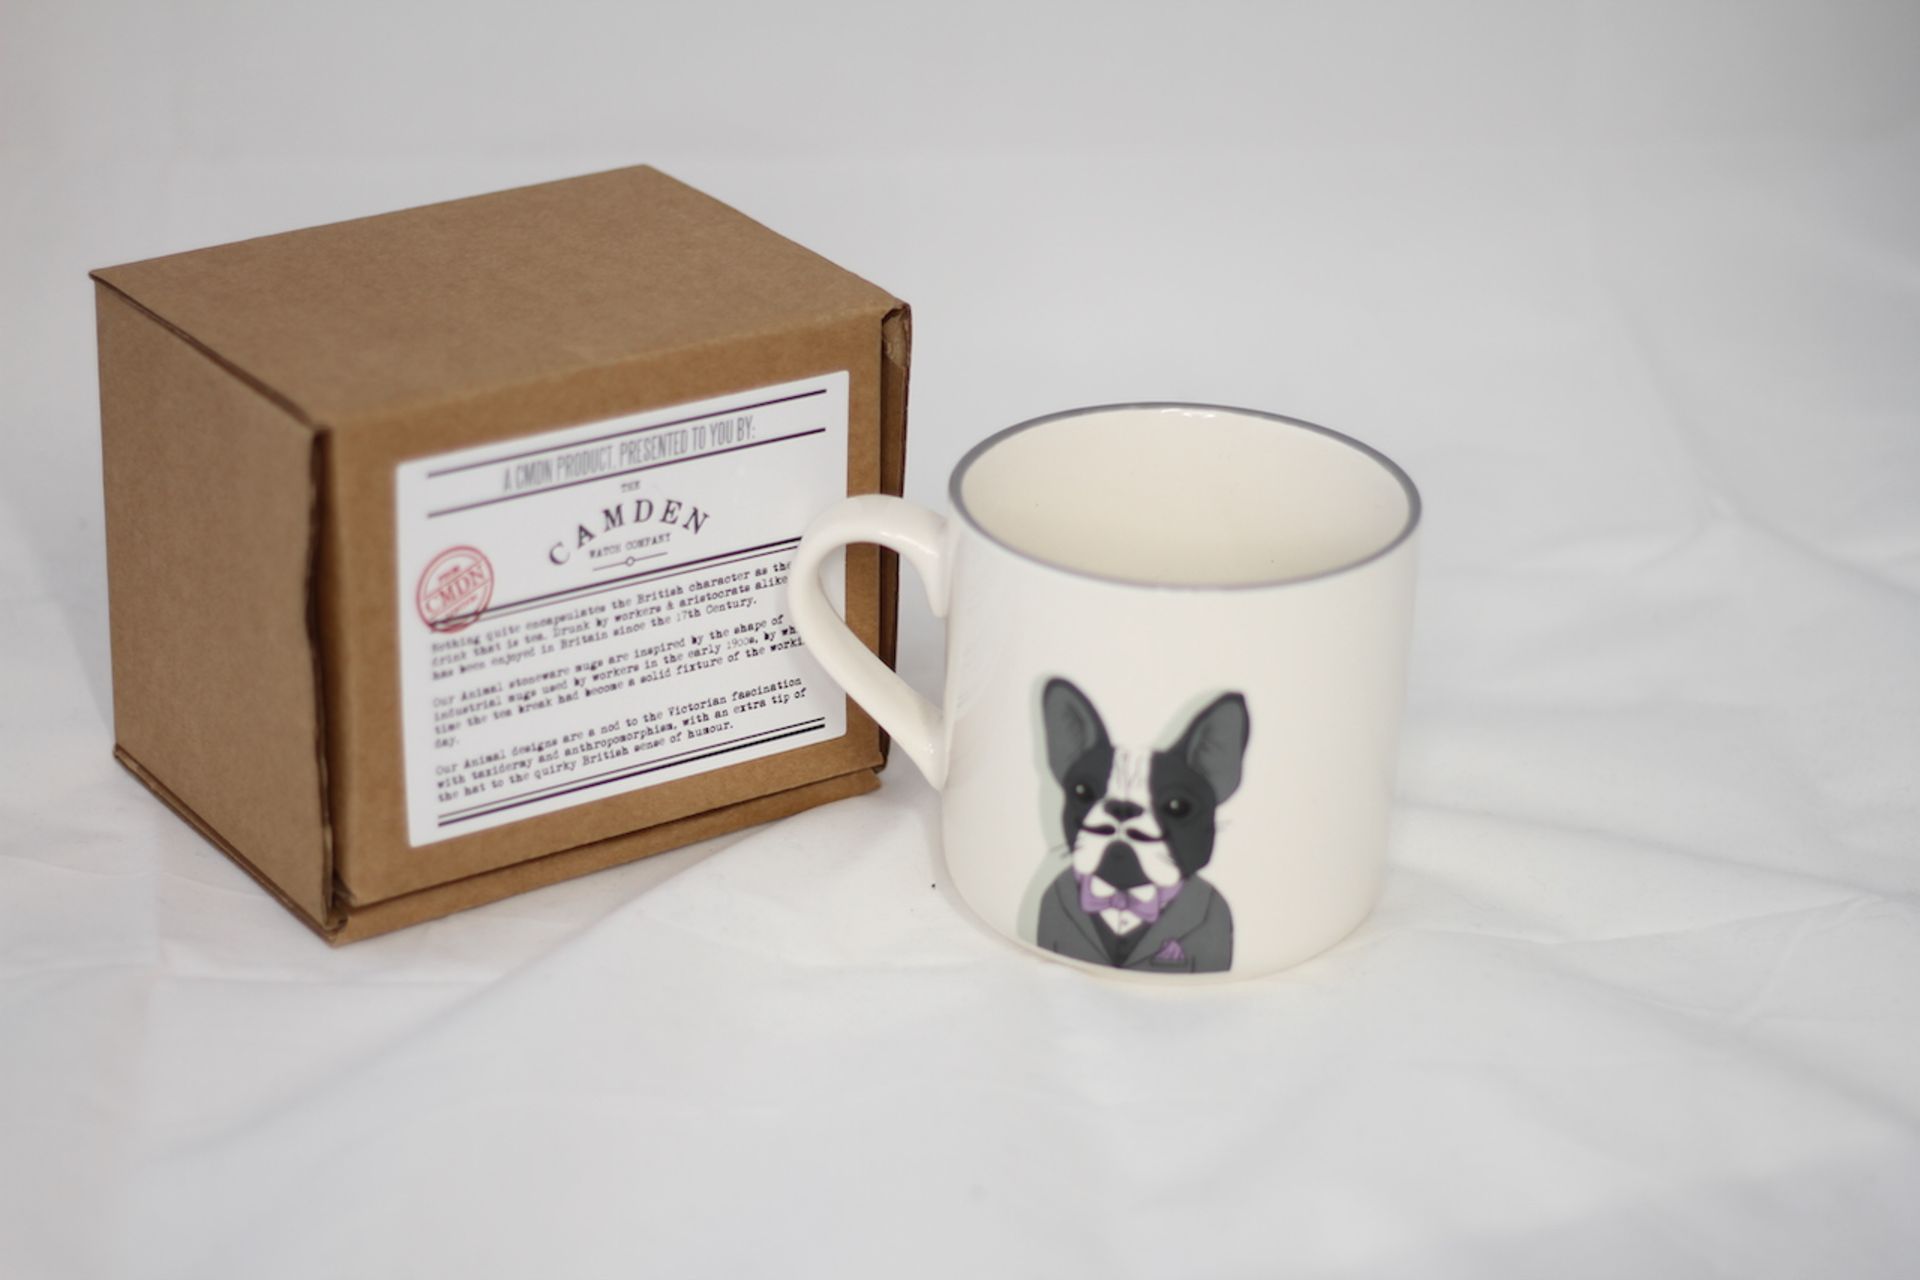 CAMDEN WATCH COMPANY PUG MUG SEALED NEW, Colour : WHITE, AGE: UNKNOWN, SIZE: UNKNOWN, CONDITION